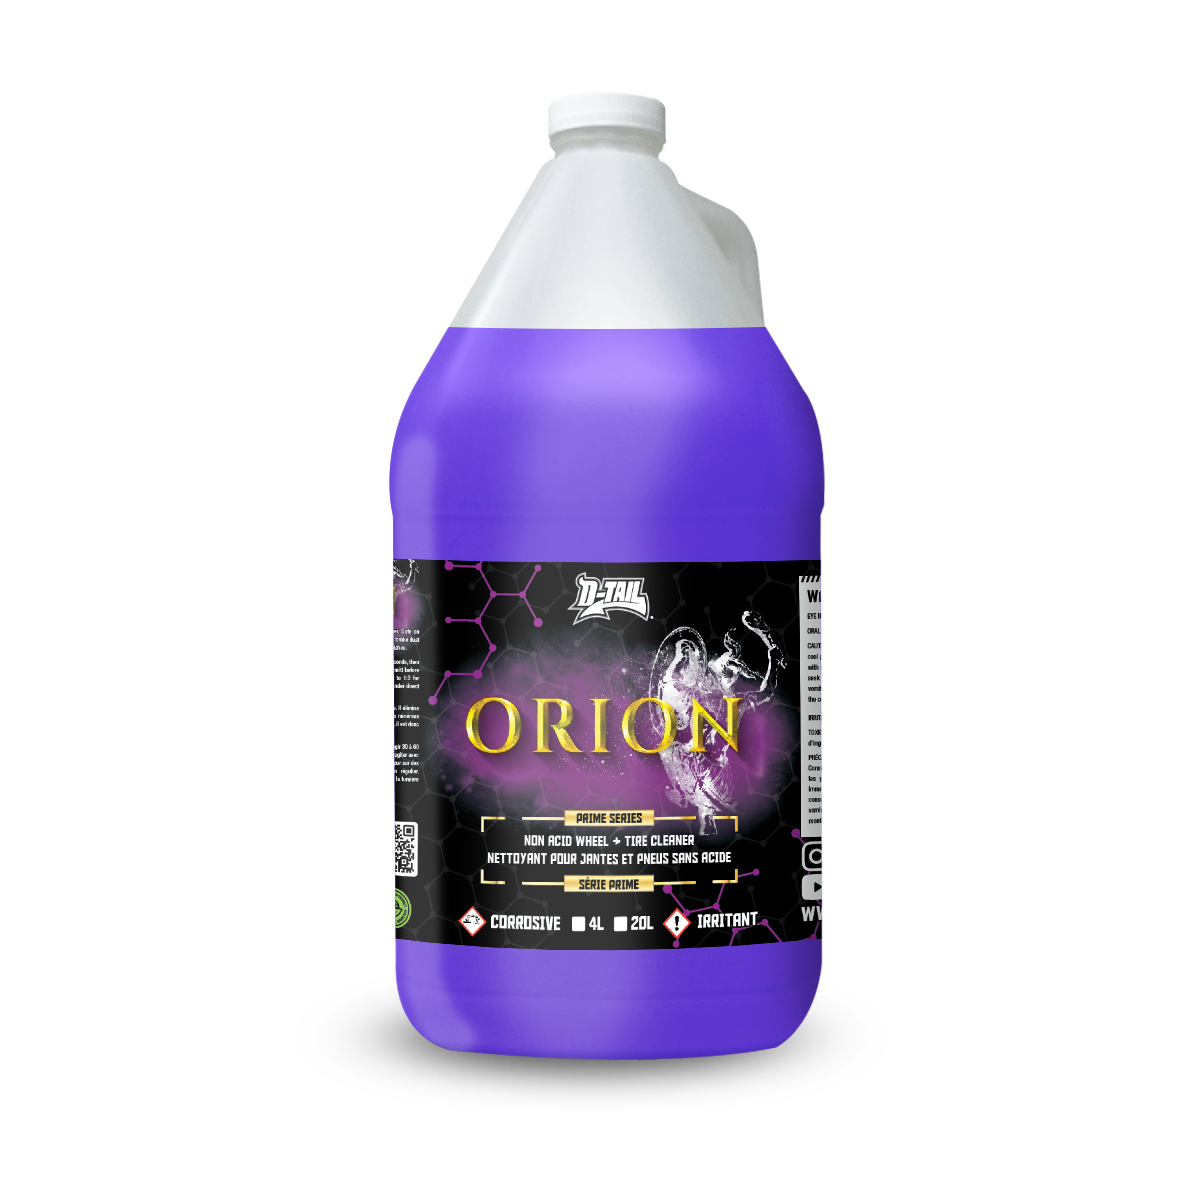 ORION Wheel & Tire Cleaner